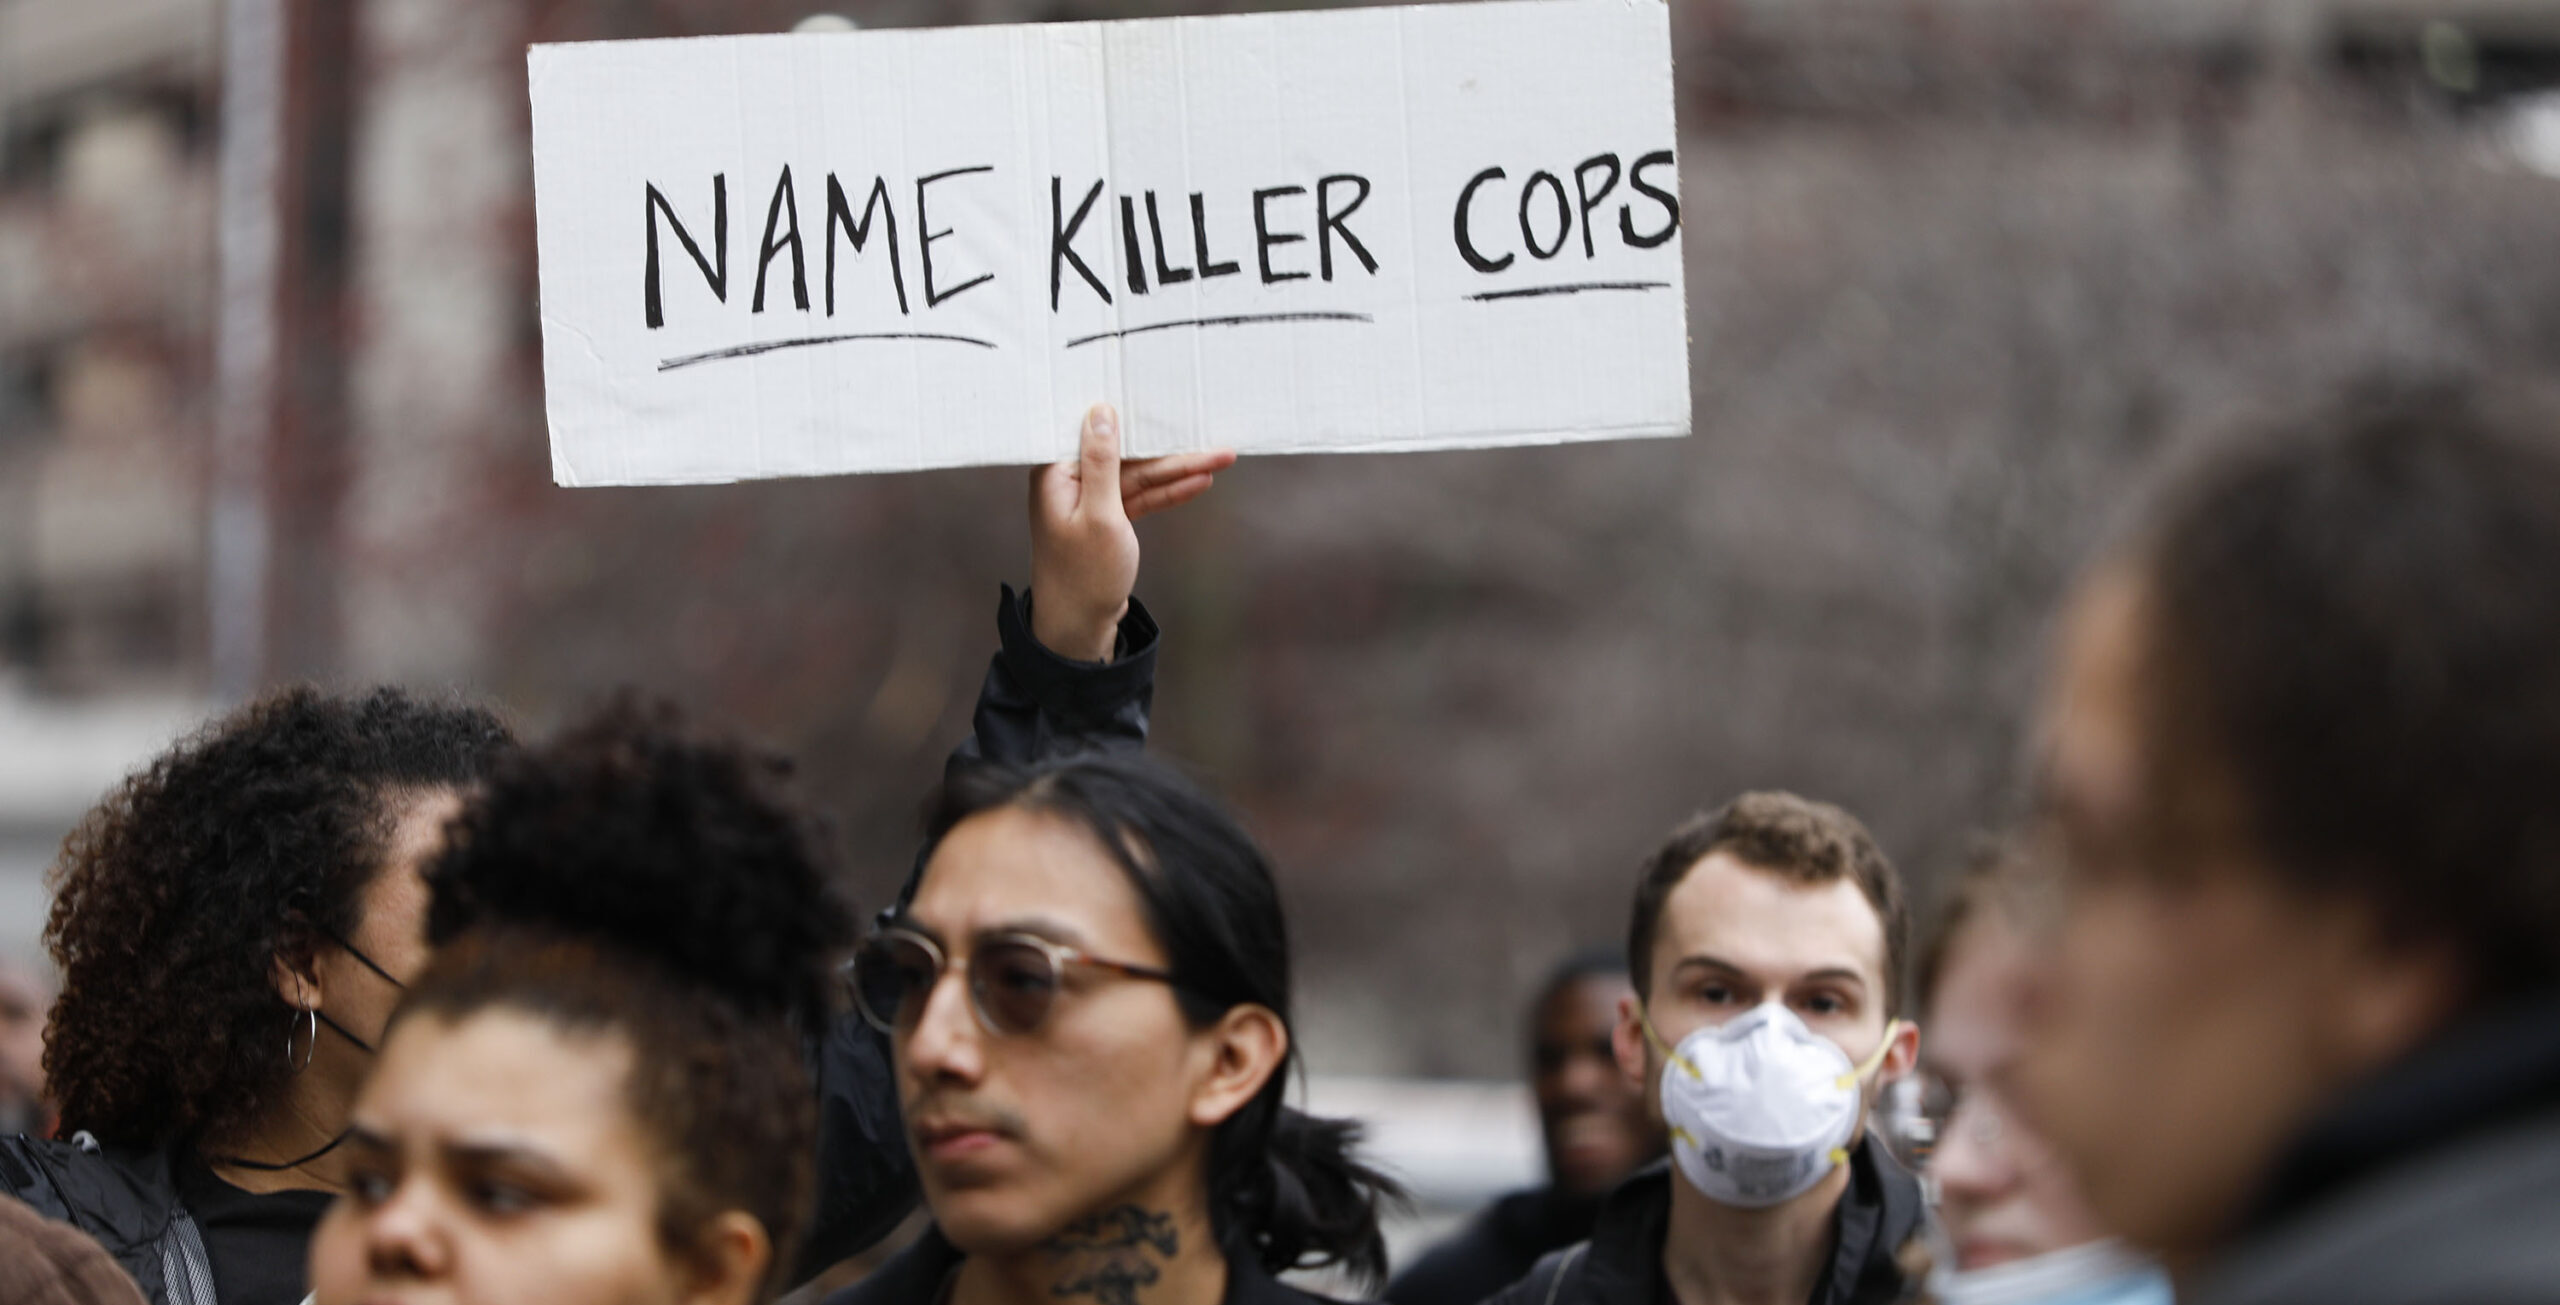 Protests Erupt Following The Release Of Videos Capturing An Officer Killing Patrick Lyoya